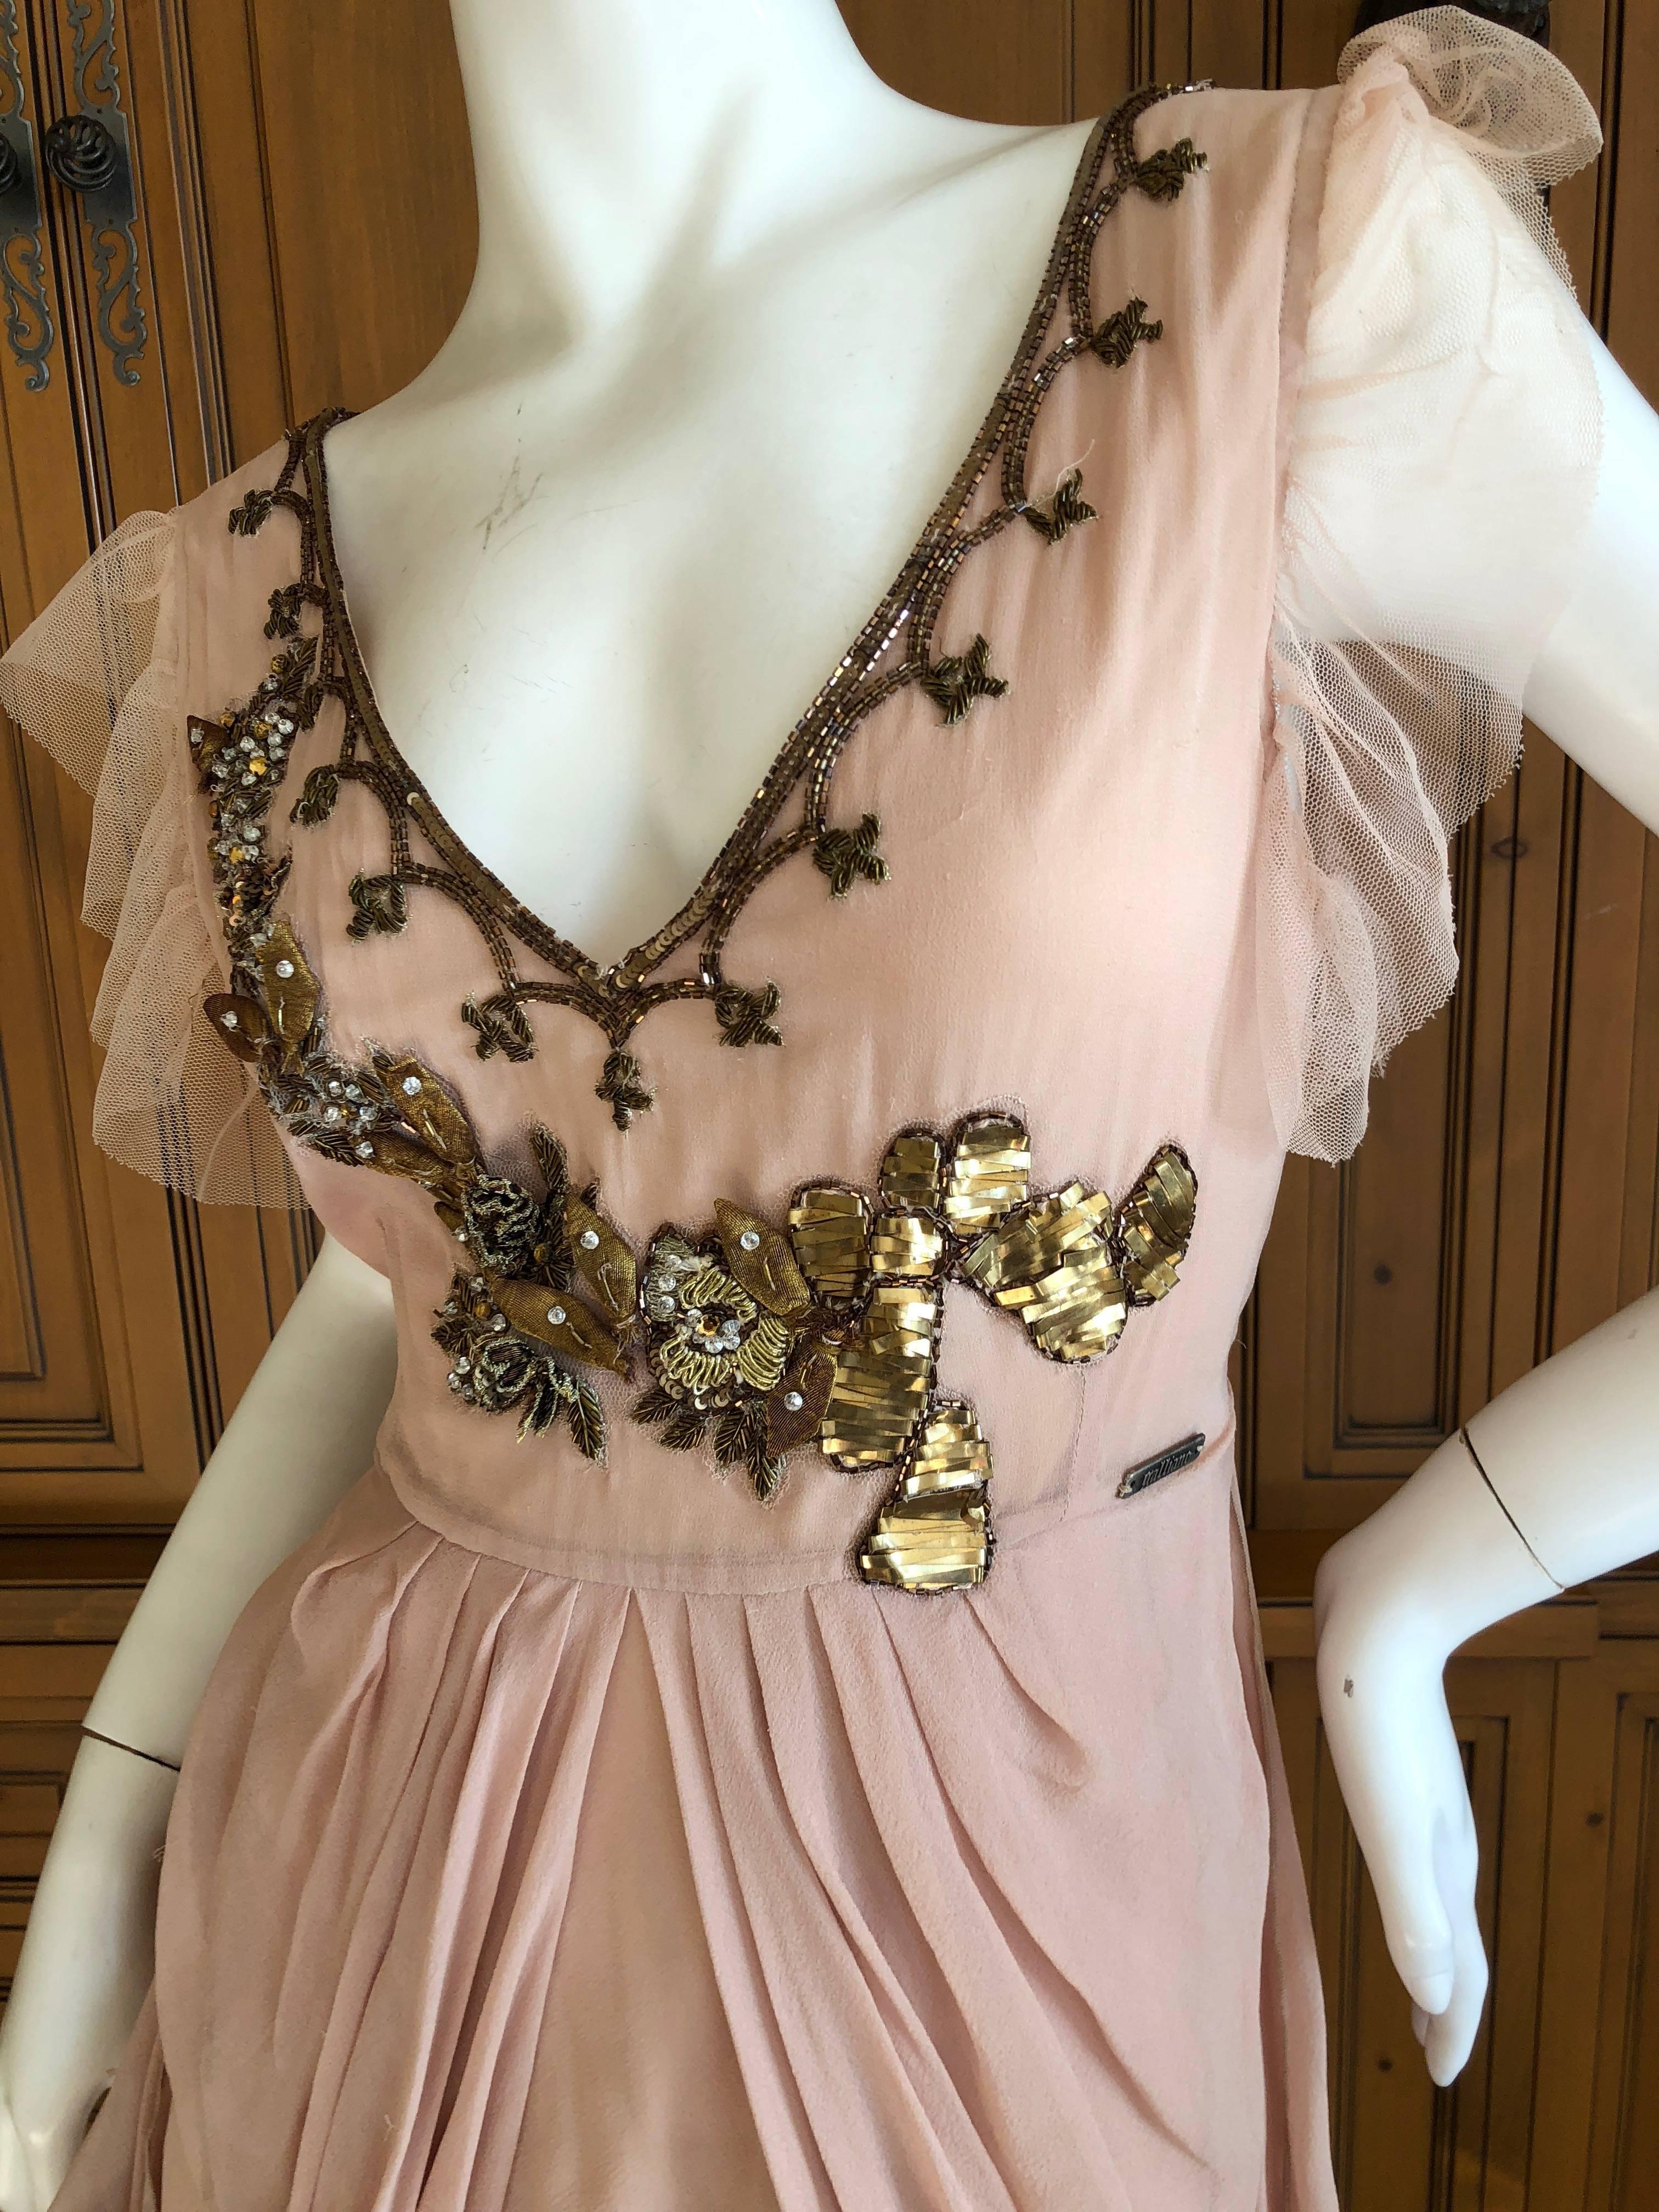 Beige John Galliano Vintage Embellished Draped Cocktail Dress New With Tags